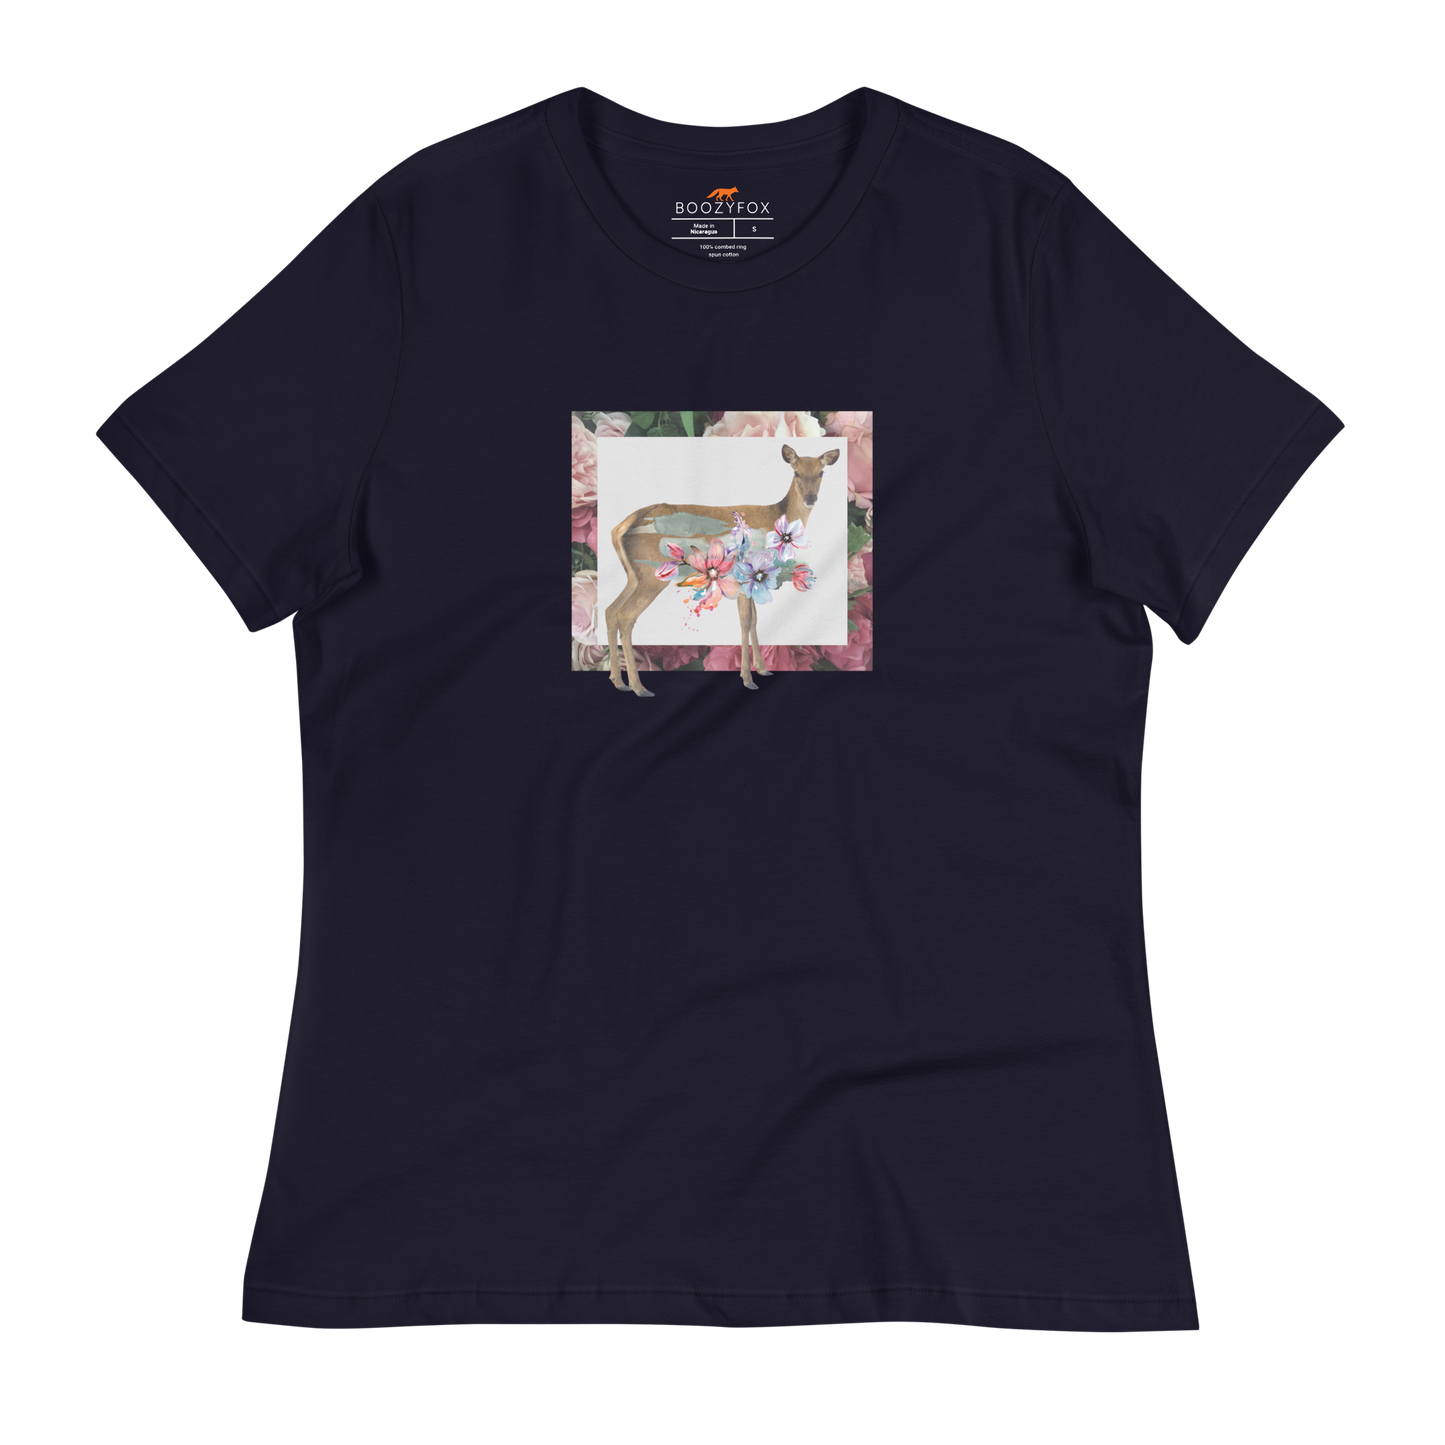 Women's relaxed navy Deer t-shirt featuring a captivating Floral Deer graphic on the chest - Women's Graphic Deer Tees - Boozy Fox